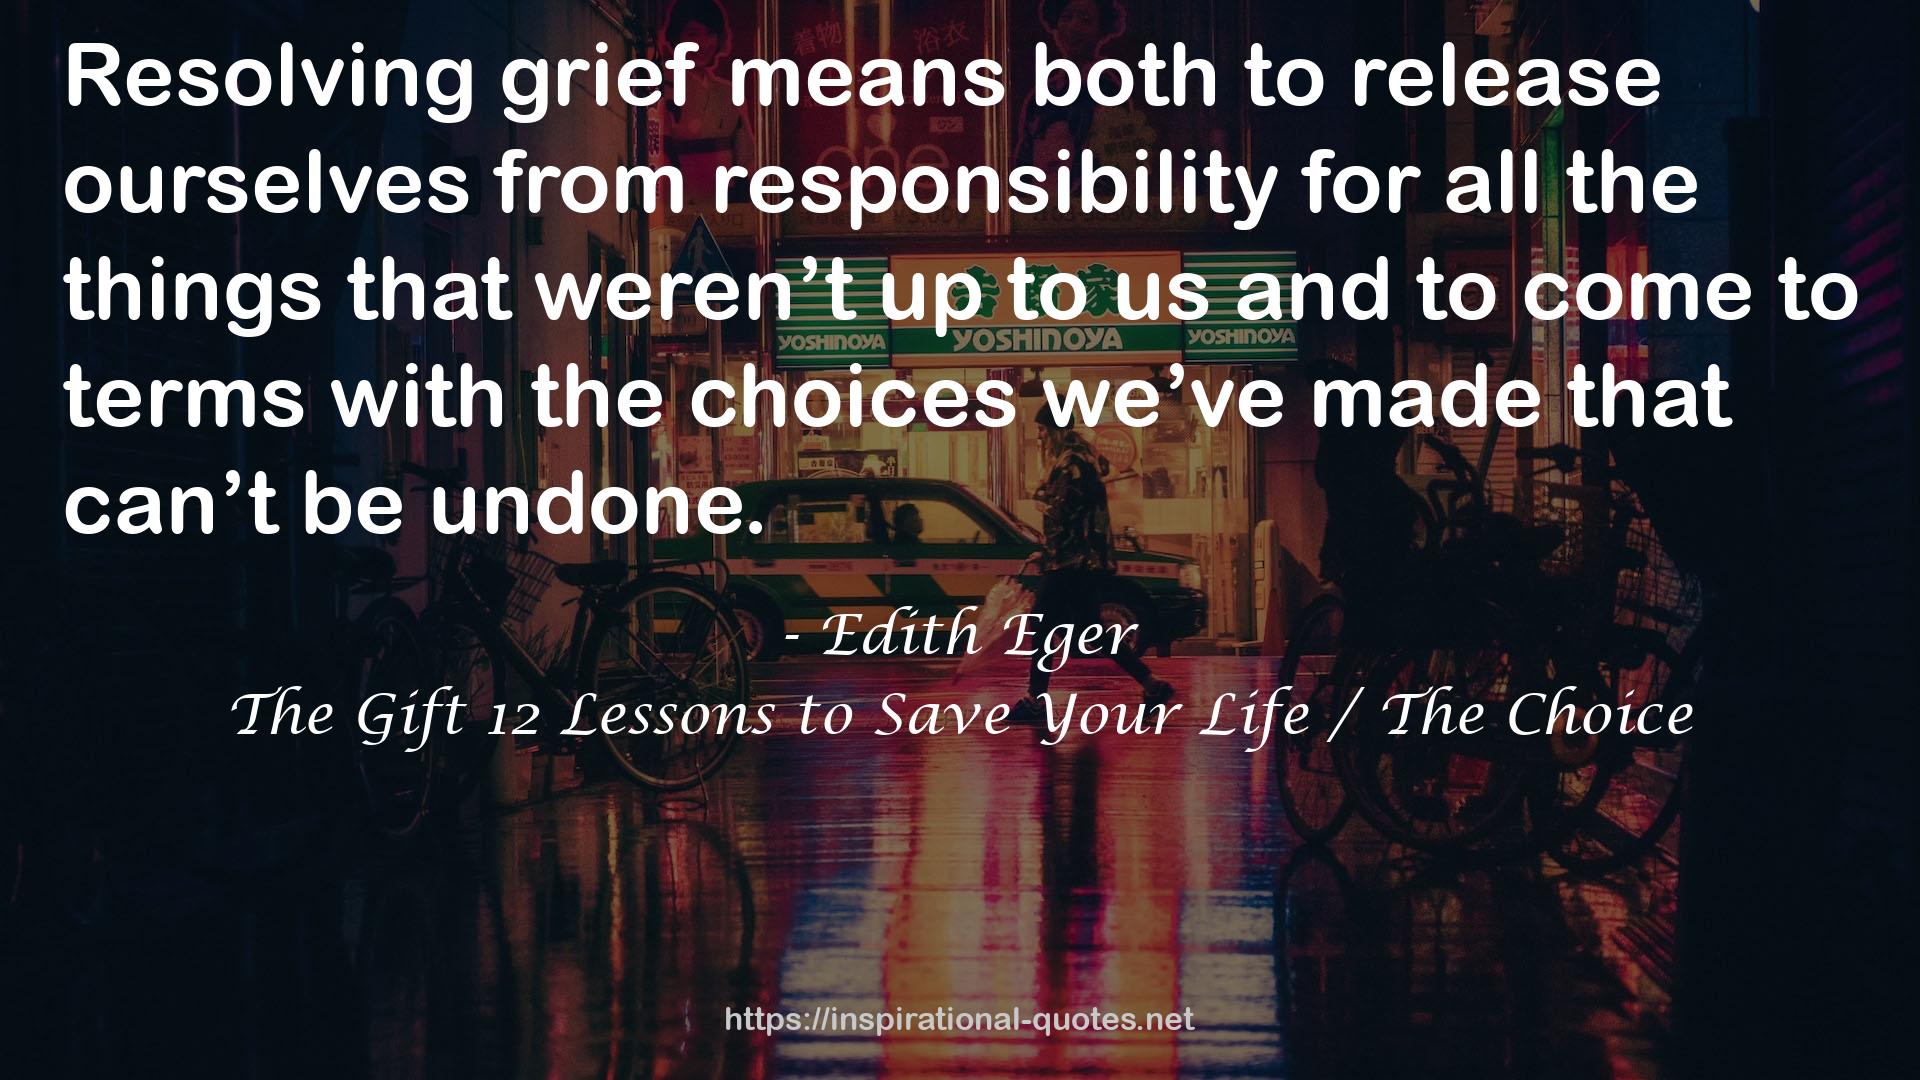 The Gift 12 Lessons to Save Your Life / The Choice QUOTES